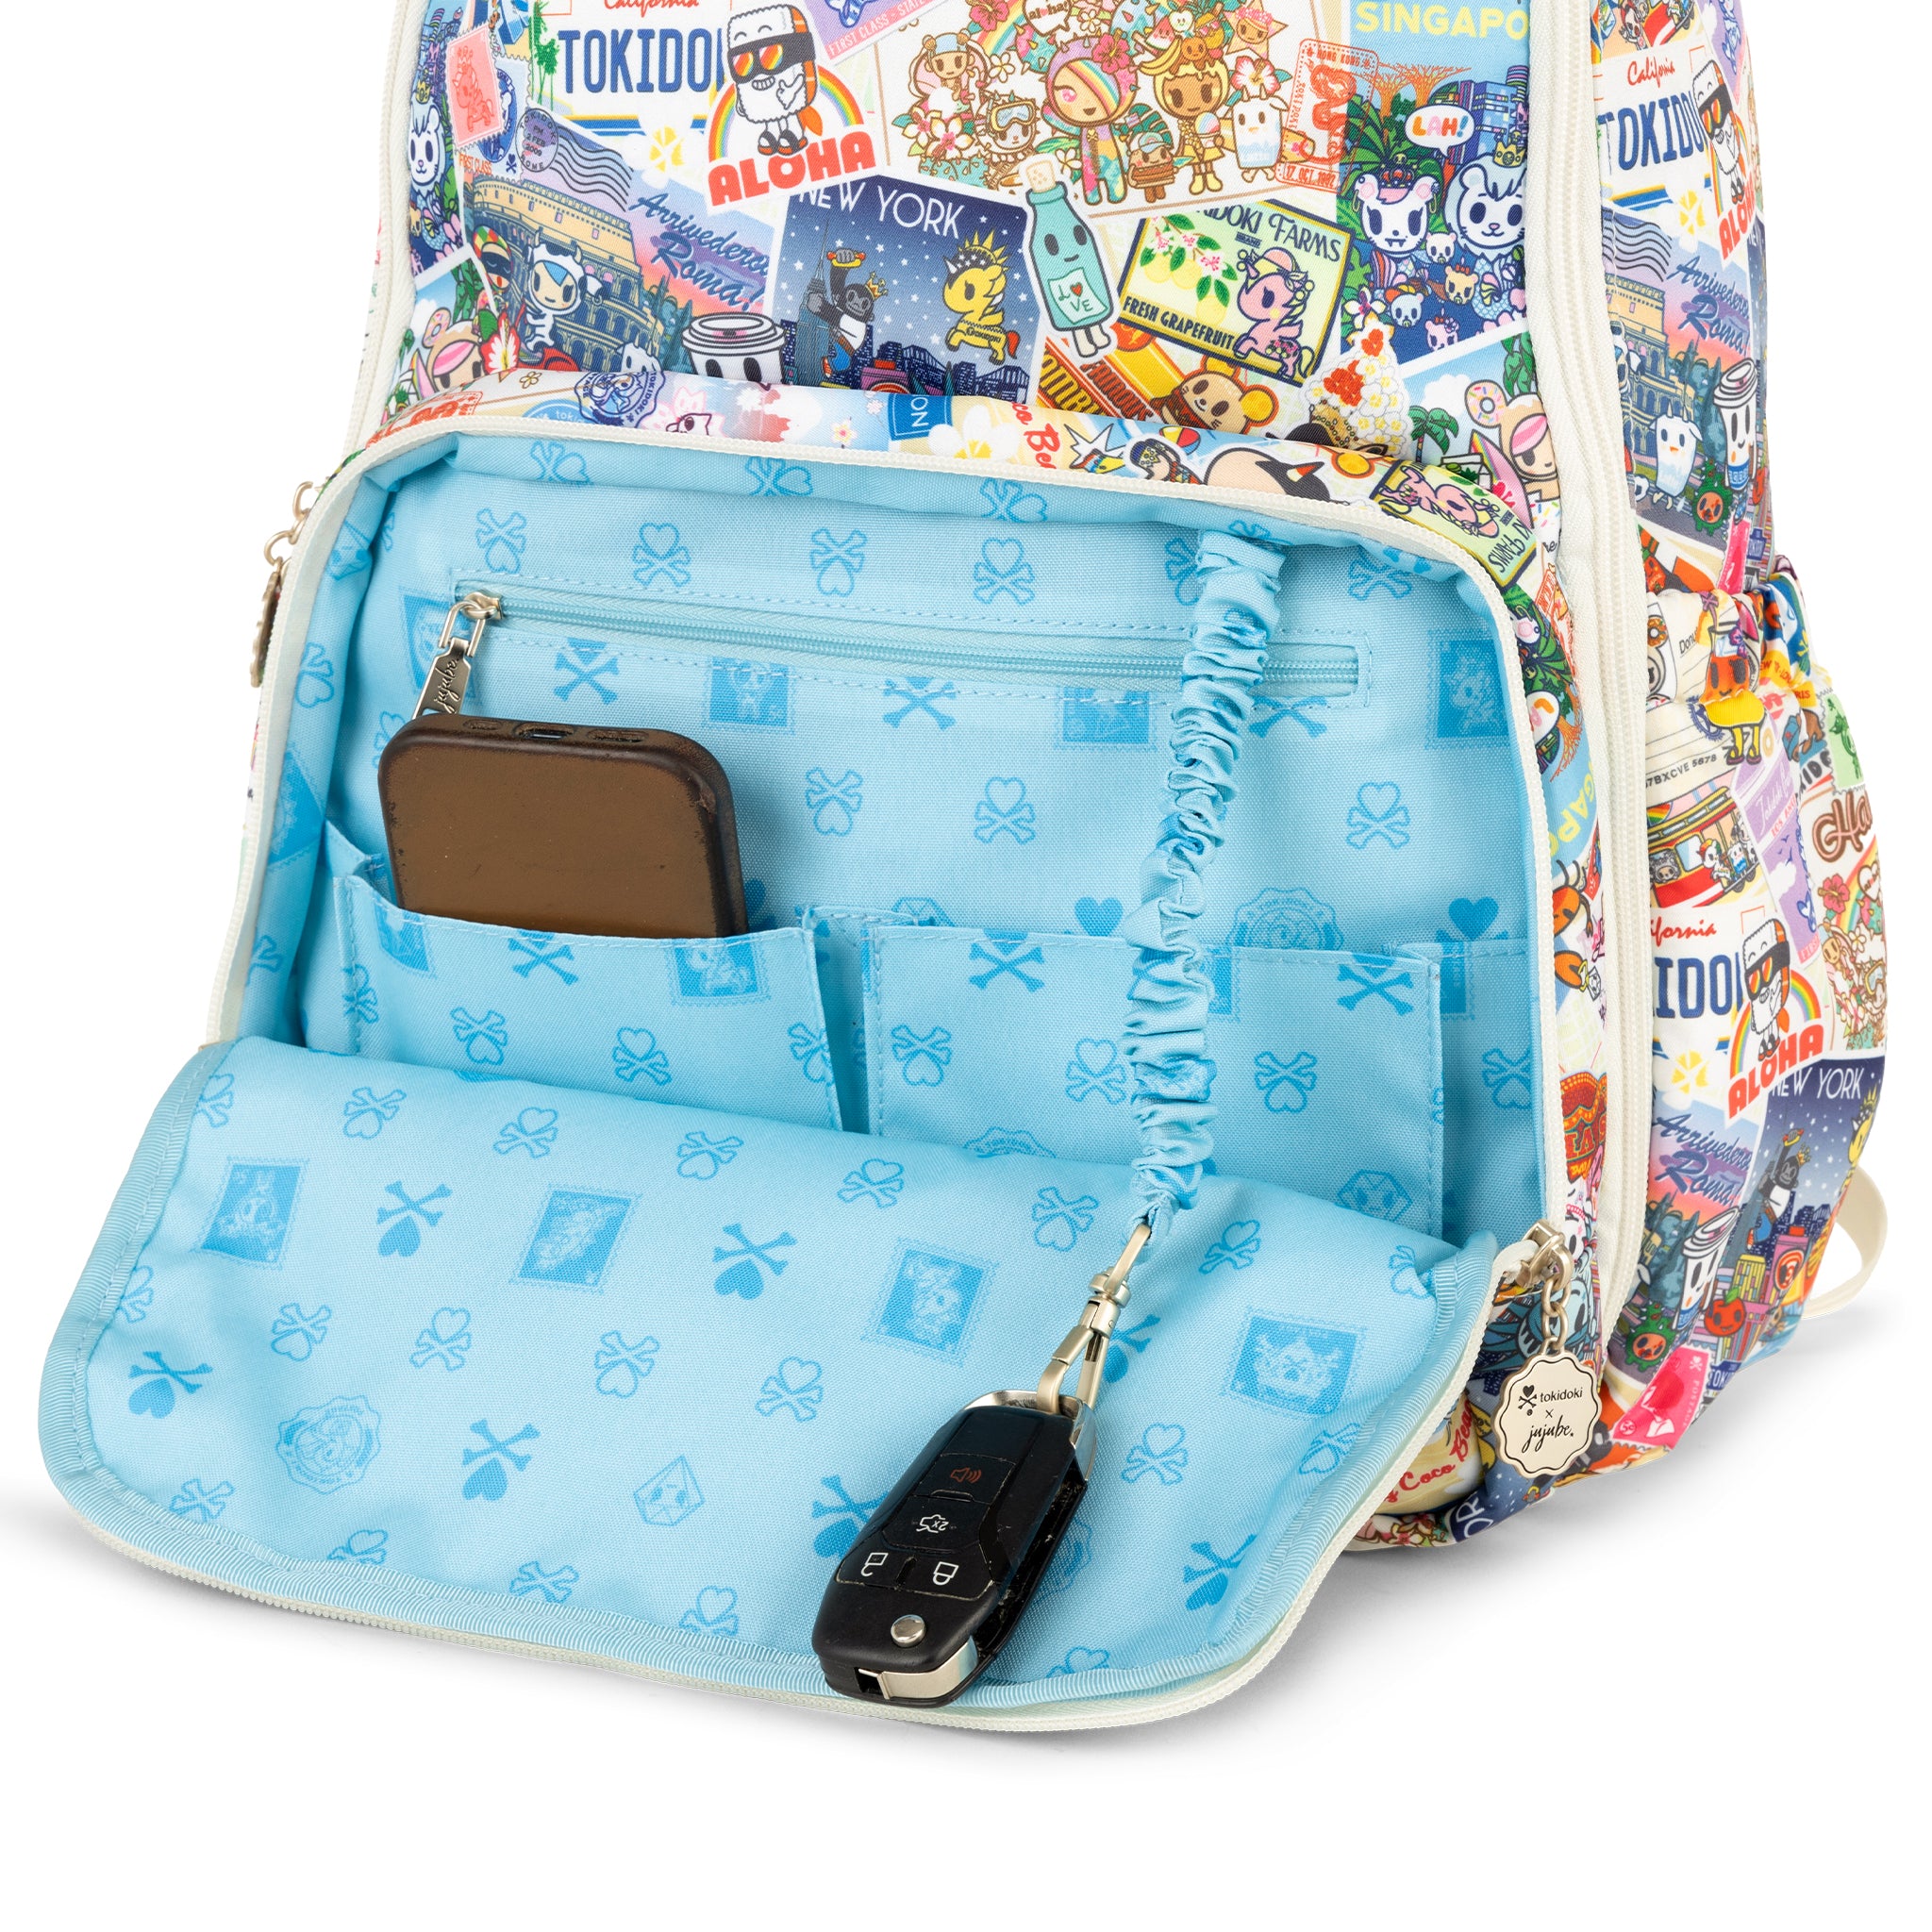 Multicolor Postcards with tokidoki characters traveling Zealous Backpack Mommy Pocket Detail View